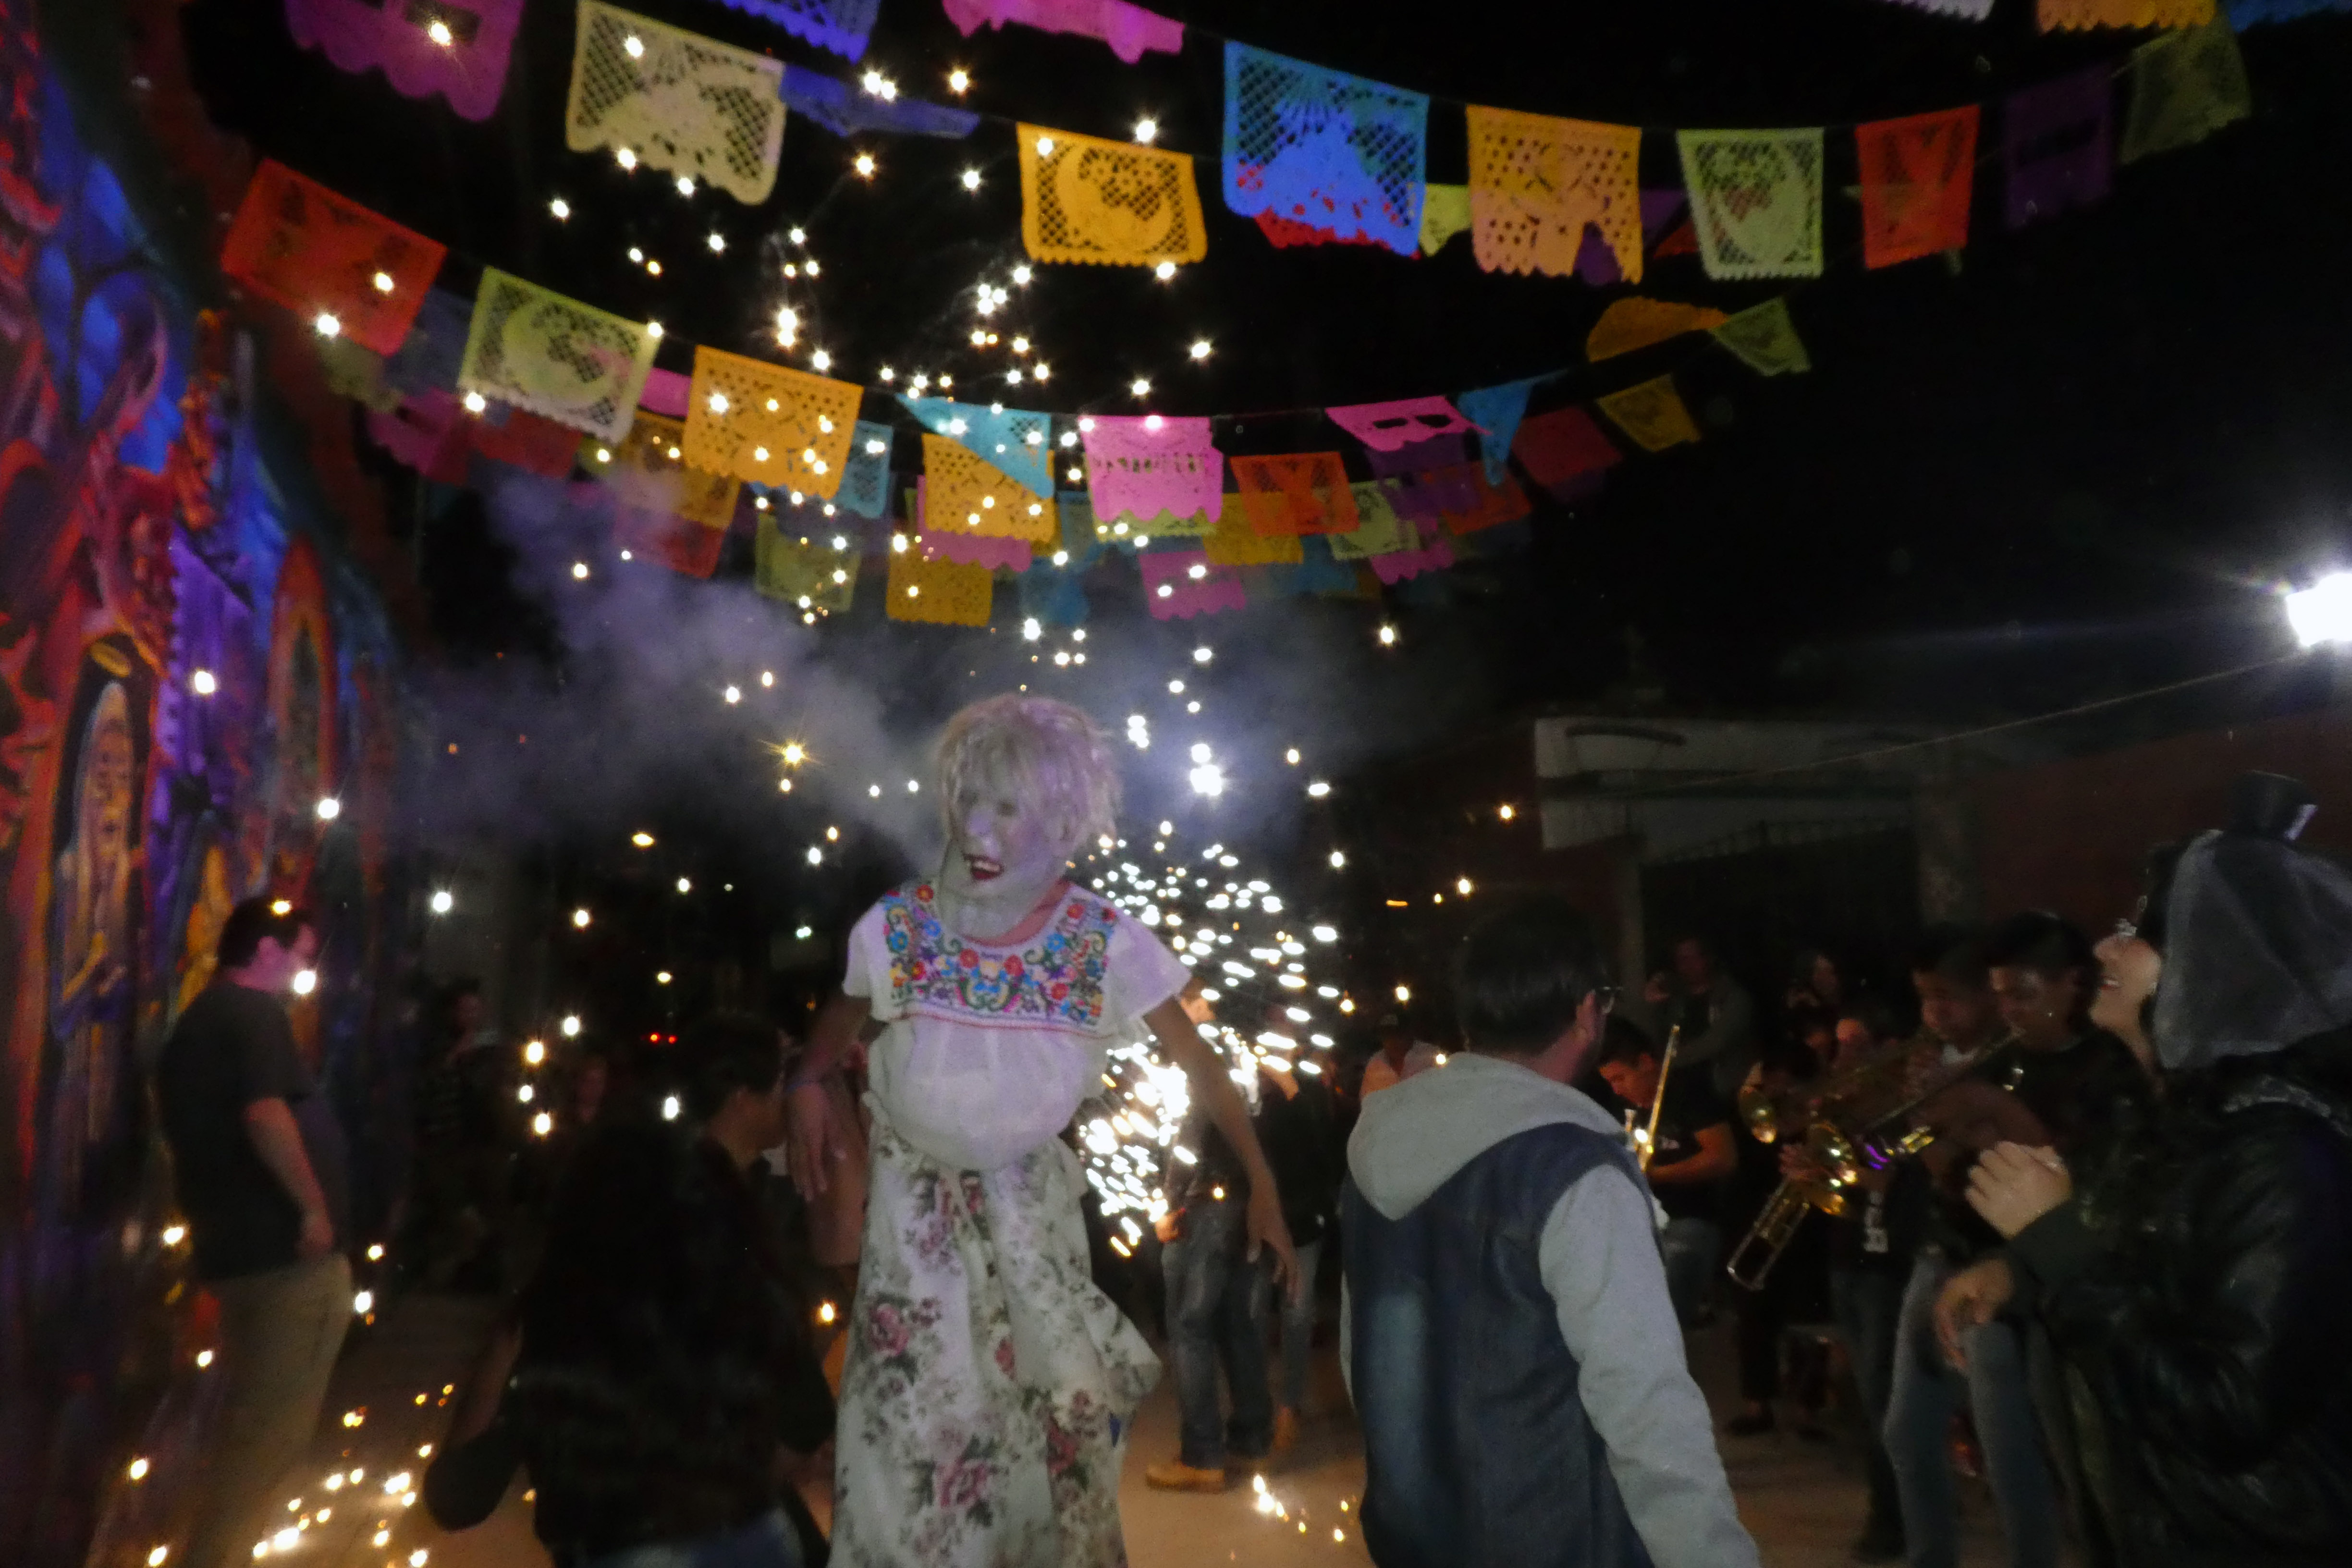 With satisfied souls, peaceful hearts,&full bellies the secular nighttime parades began. Papier-mâché masked dancers flew to the beat of the brass mariachi bands as fireworks lit their colorful paths. The mural lined streets were painted with memento mori & cozily enclosed with delicate papel picado